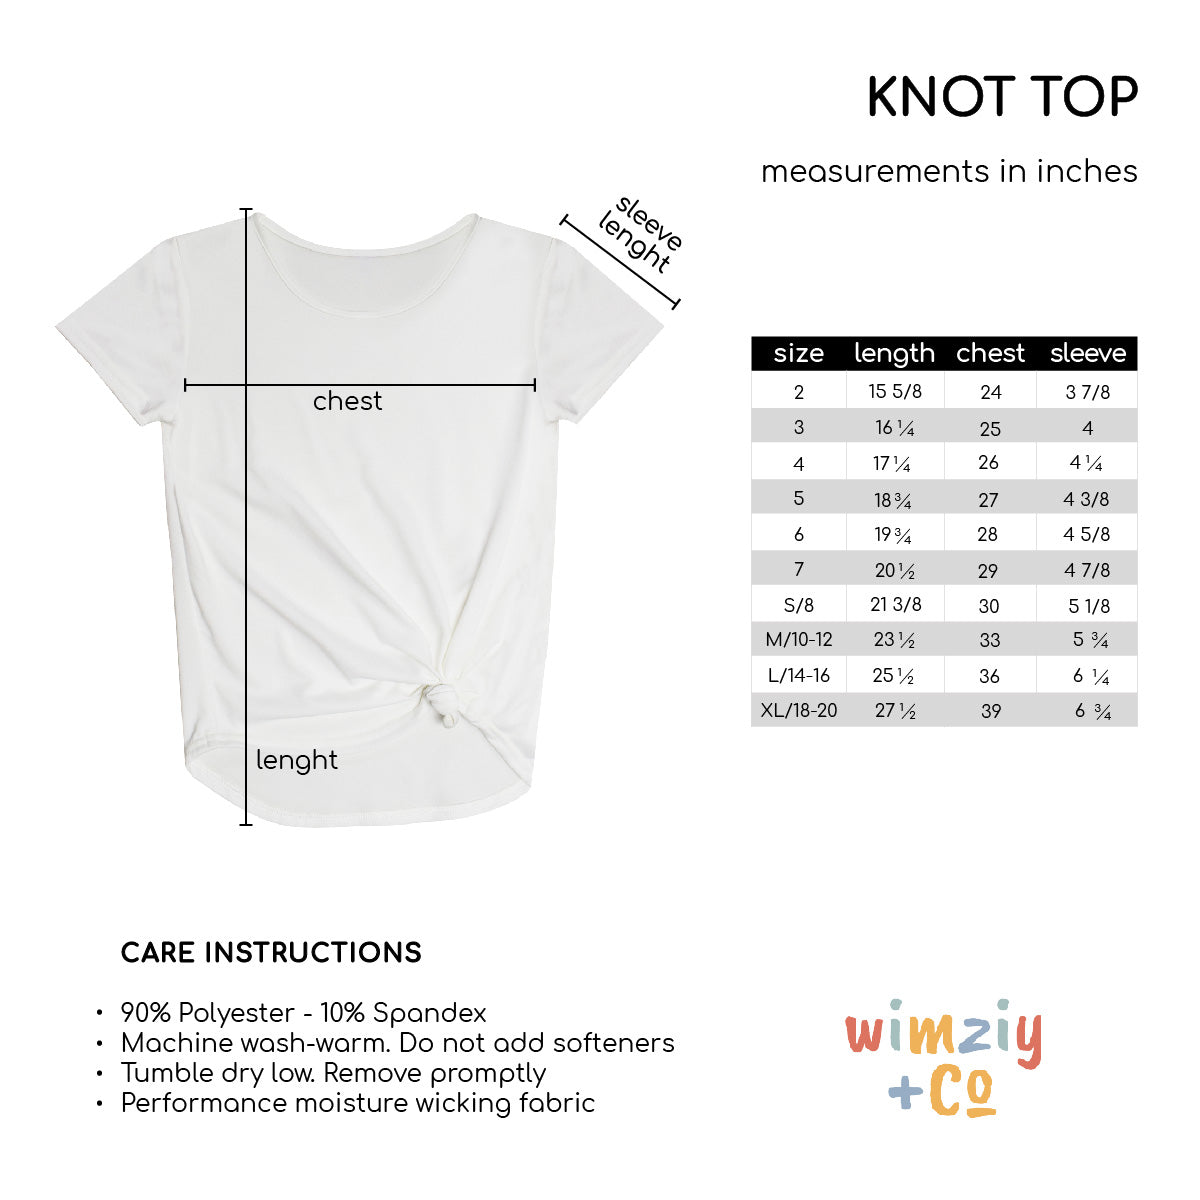 Pencil Initial And Name White Knot Top - Wimziy&Co.